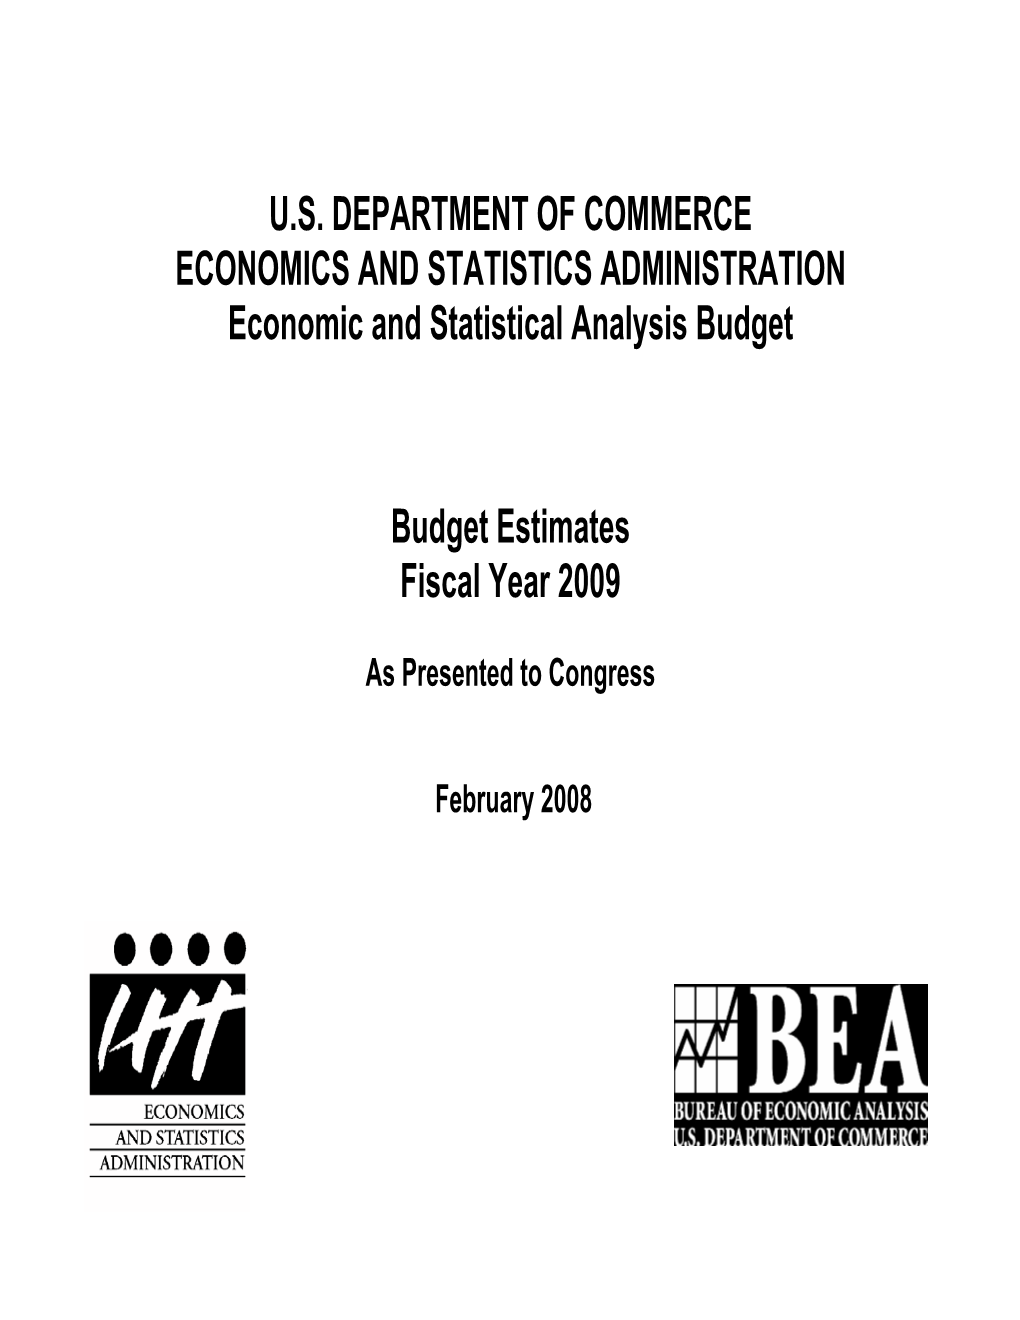 Economic and Statistical Analysis Budget